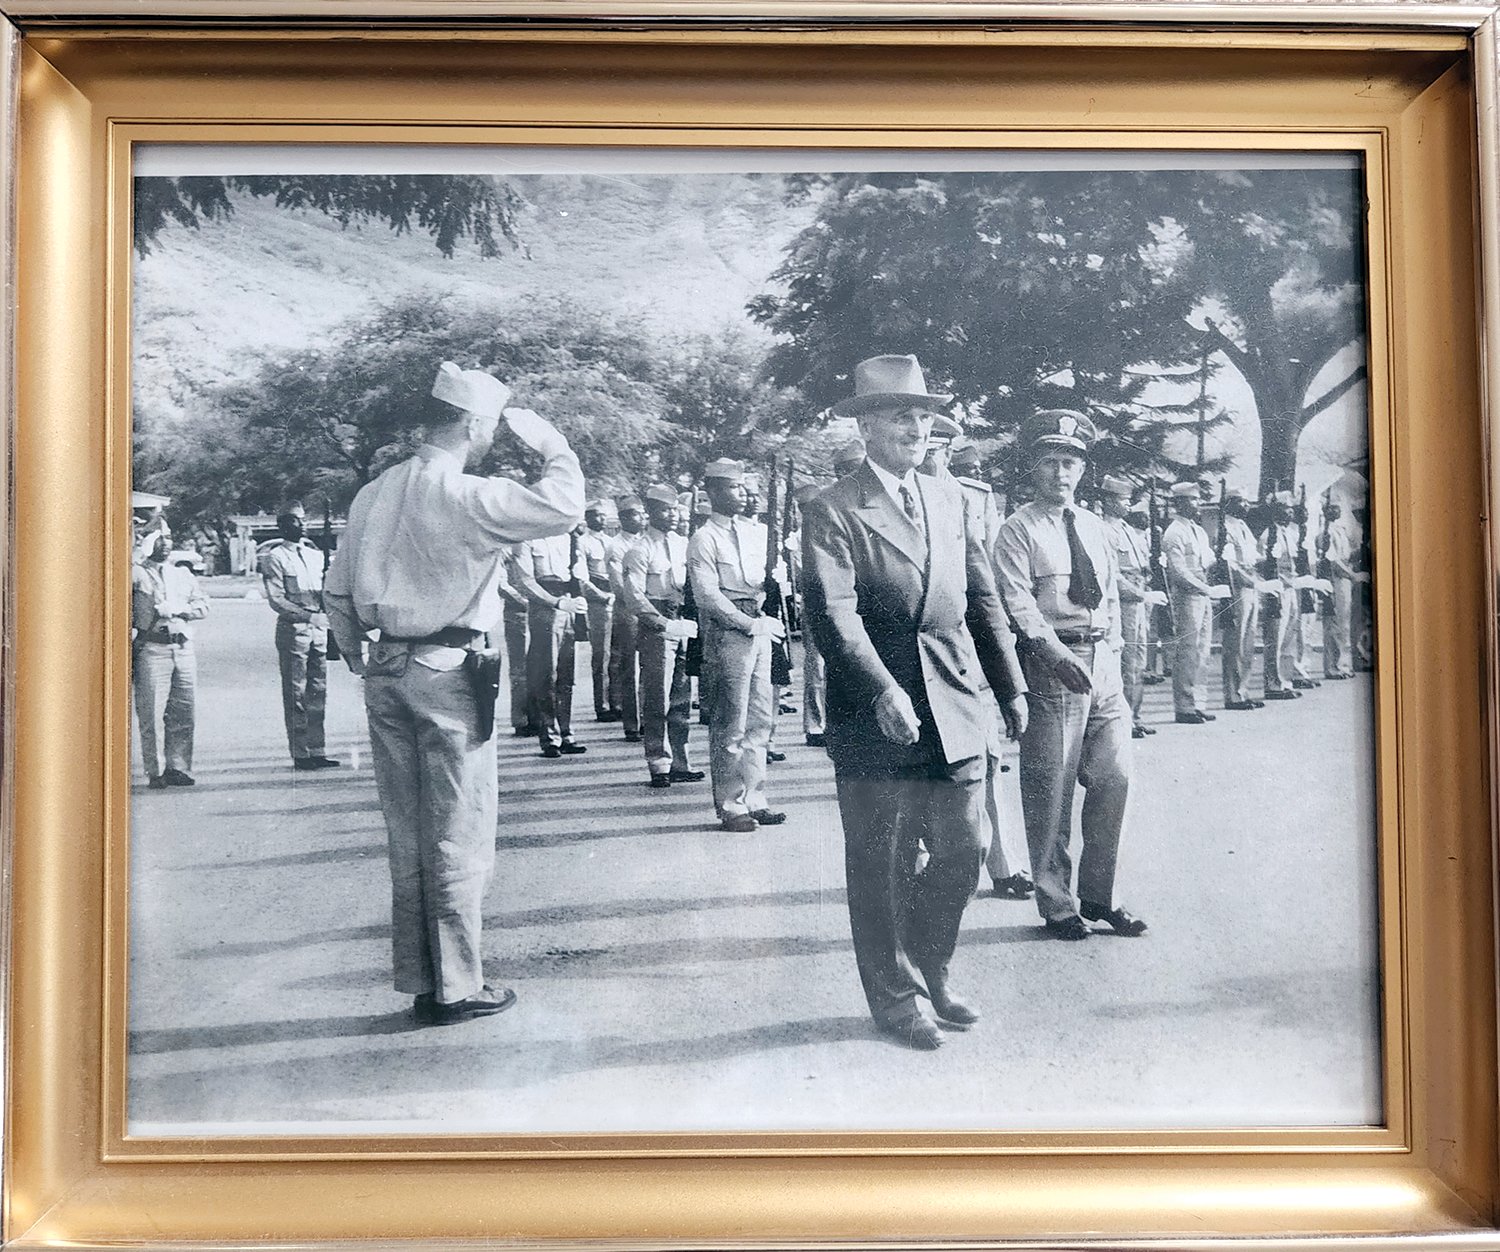 President Harry Truman visits Hawaii in this framed October 1950 photograph framed by Robert McInnis.